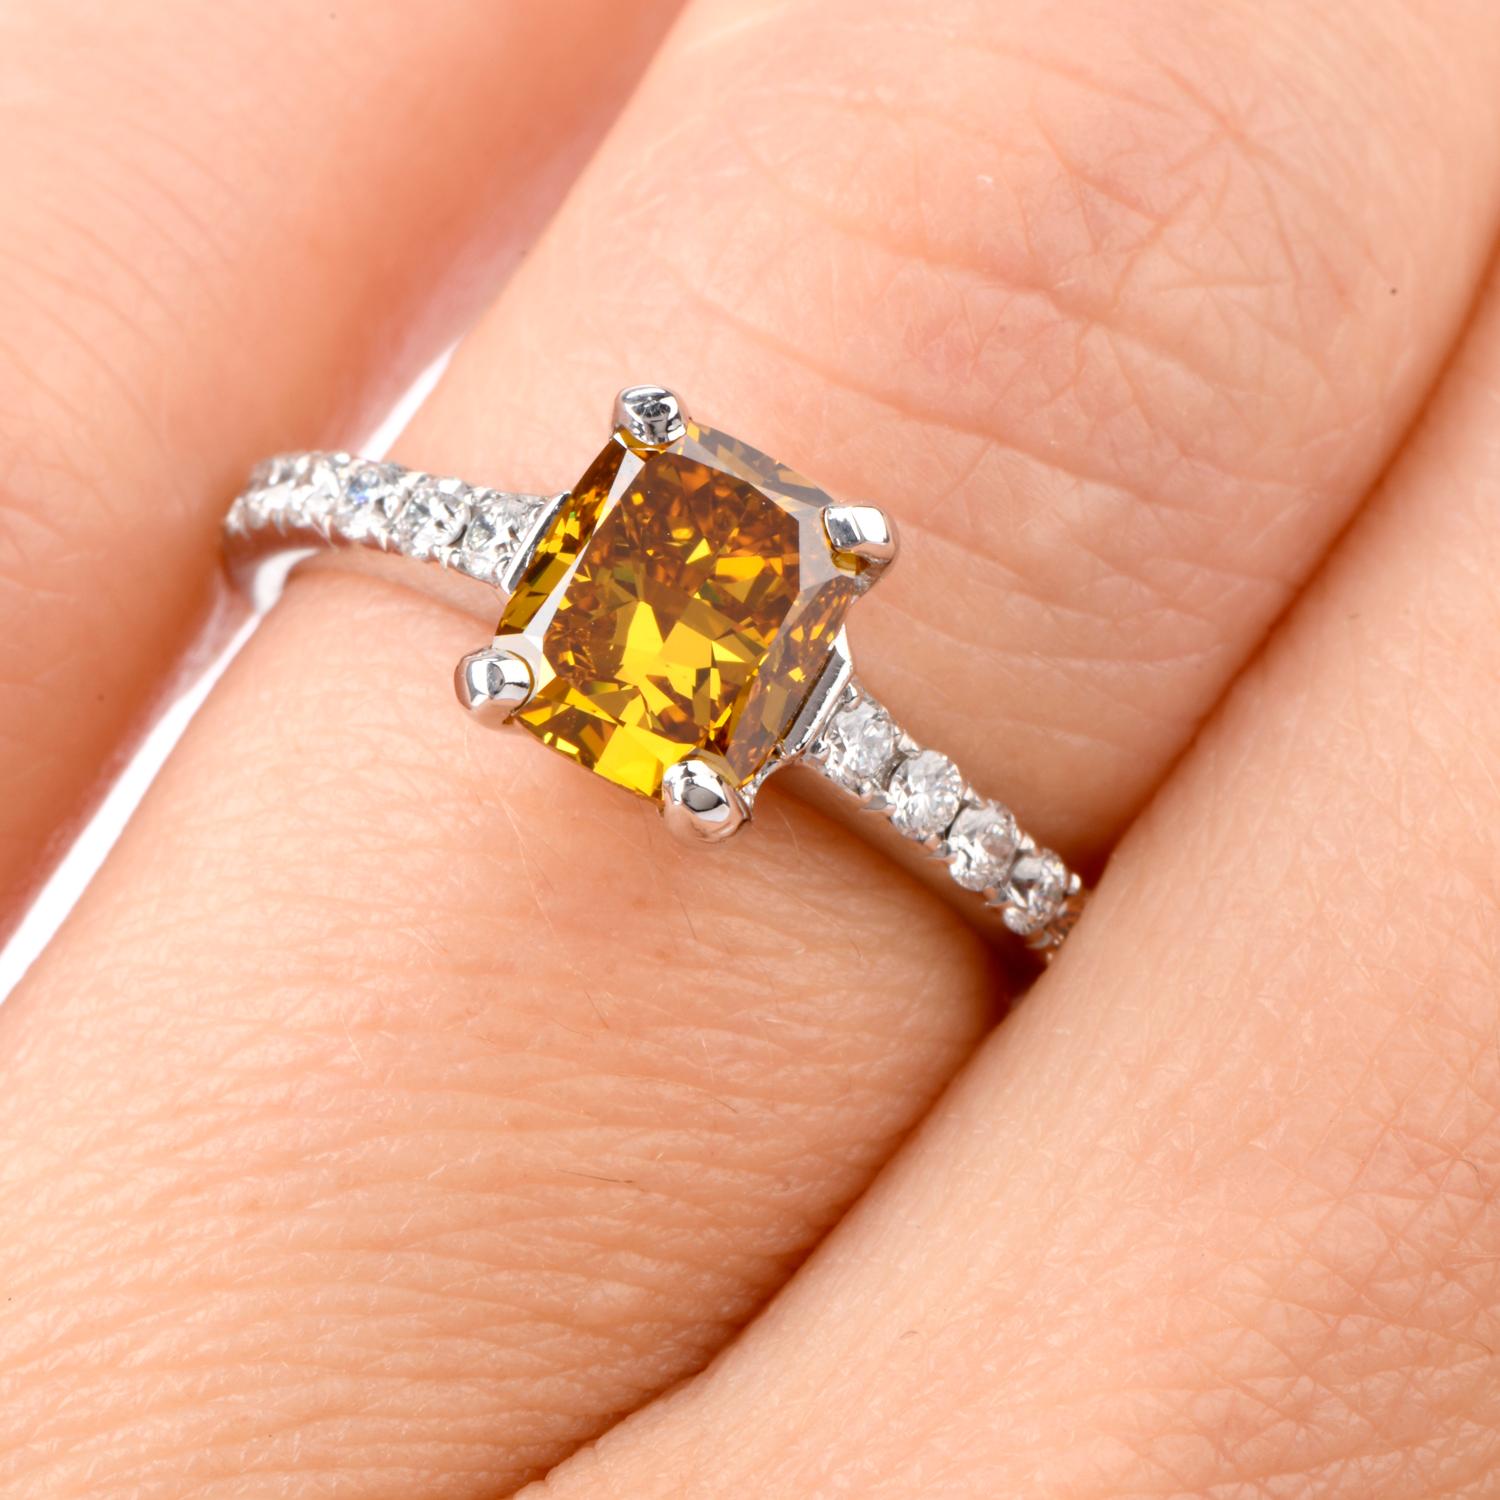 Not an Engagment Ring like all others!  This stunning ring features a GIA Certified 1.60 carat cushion shaped natural Fancy Deep Orage-Yellow SI1 clarity Diamond in the center and bright white diamonds on either side and down the shoulders.  These